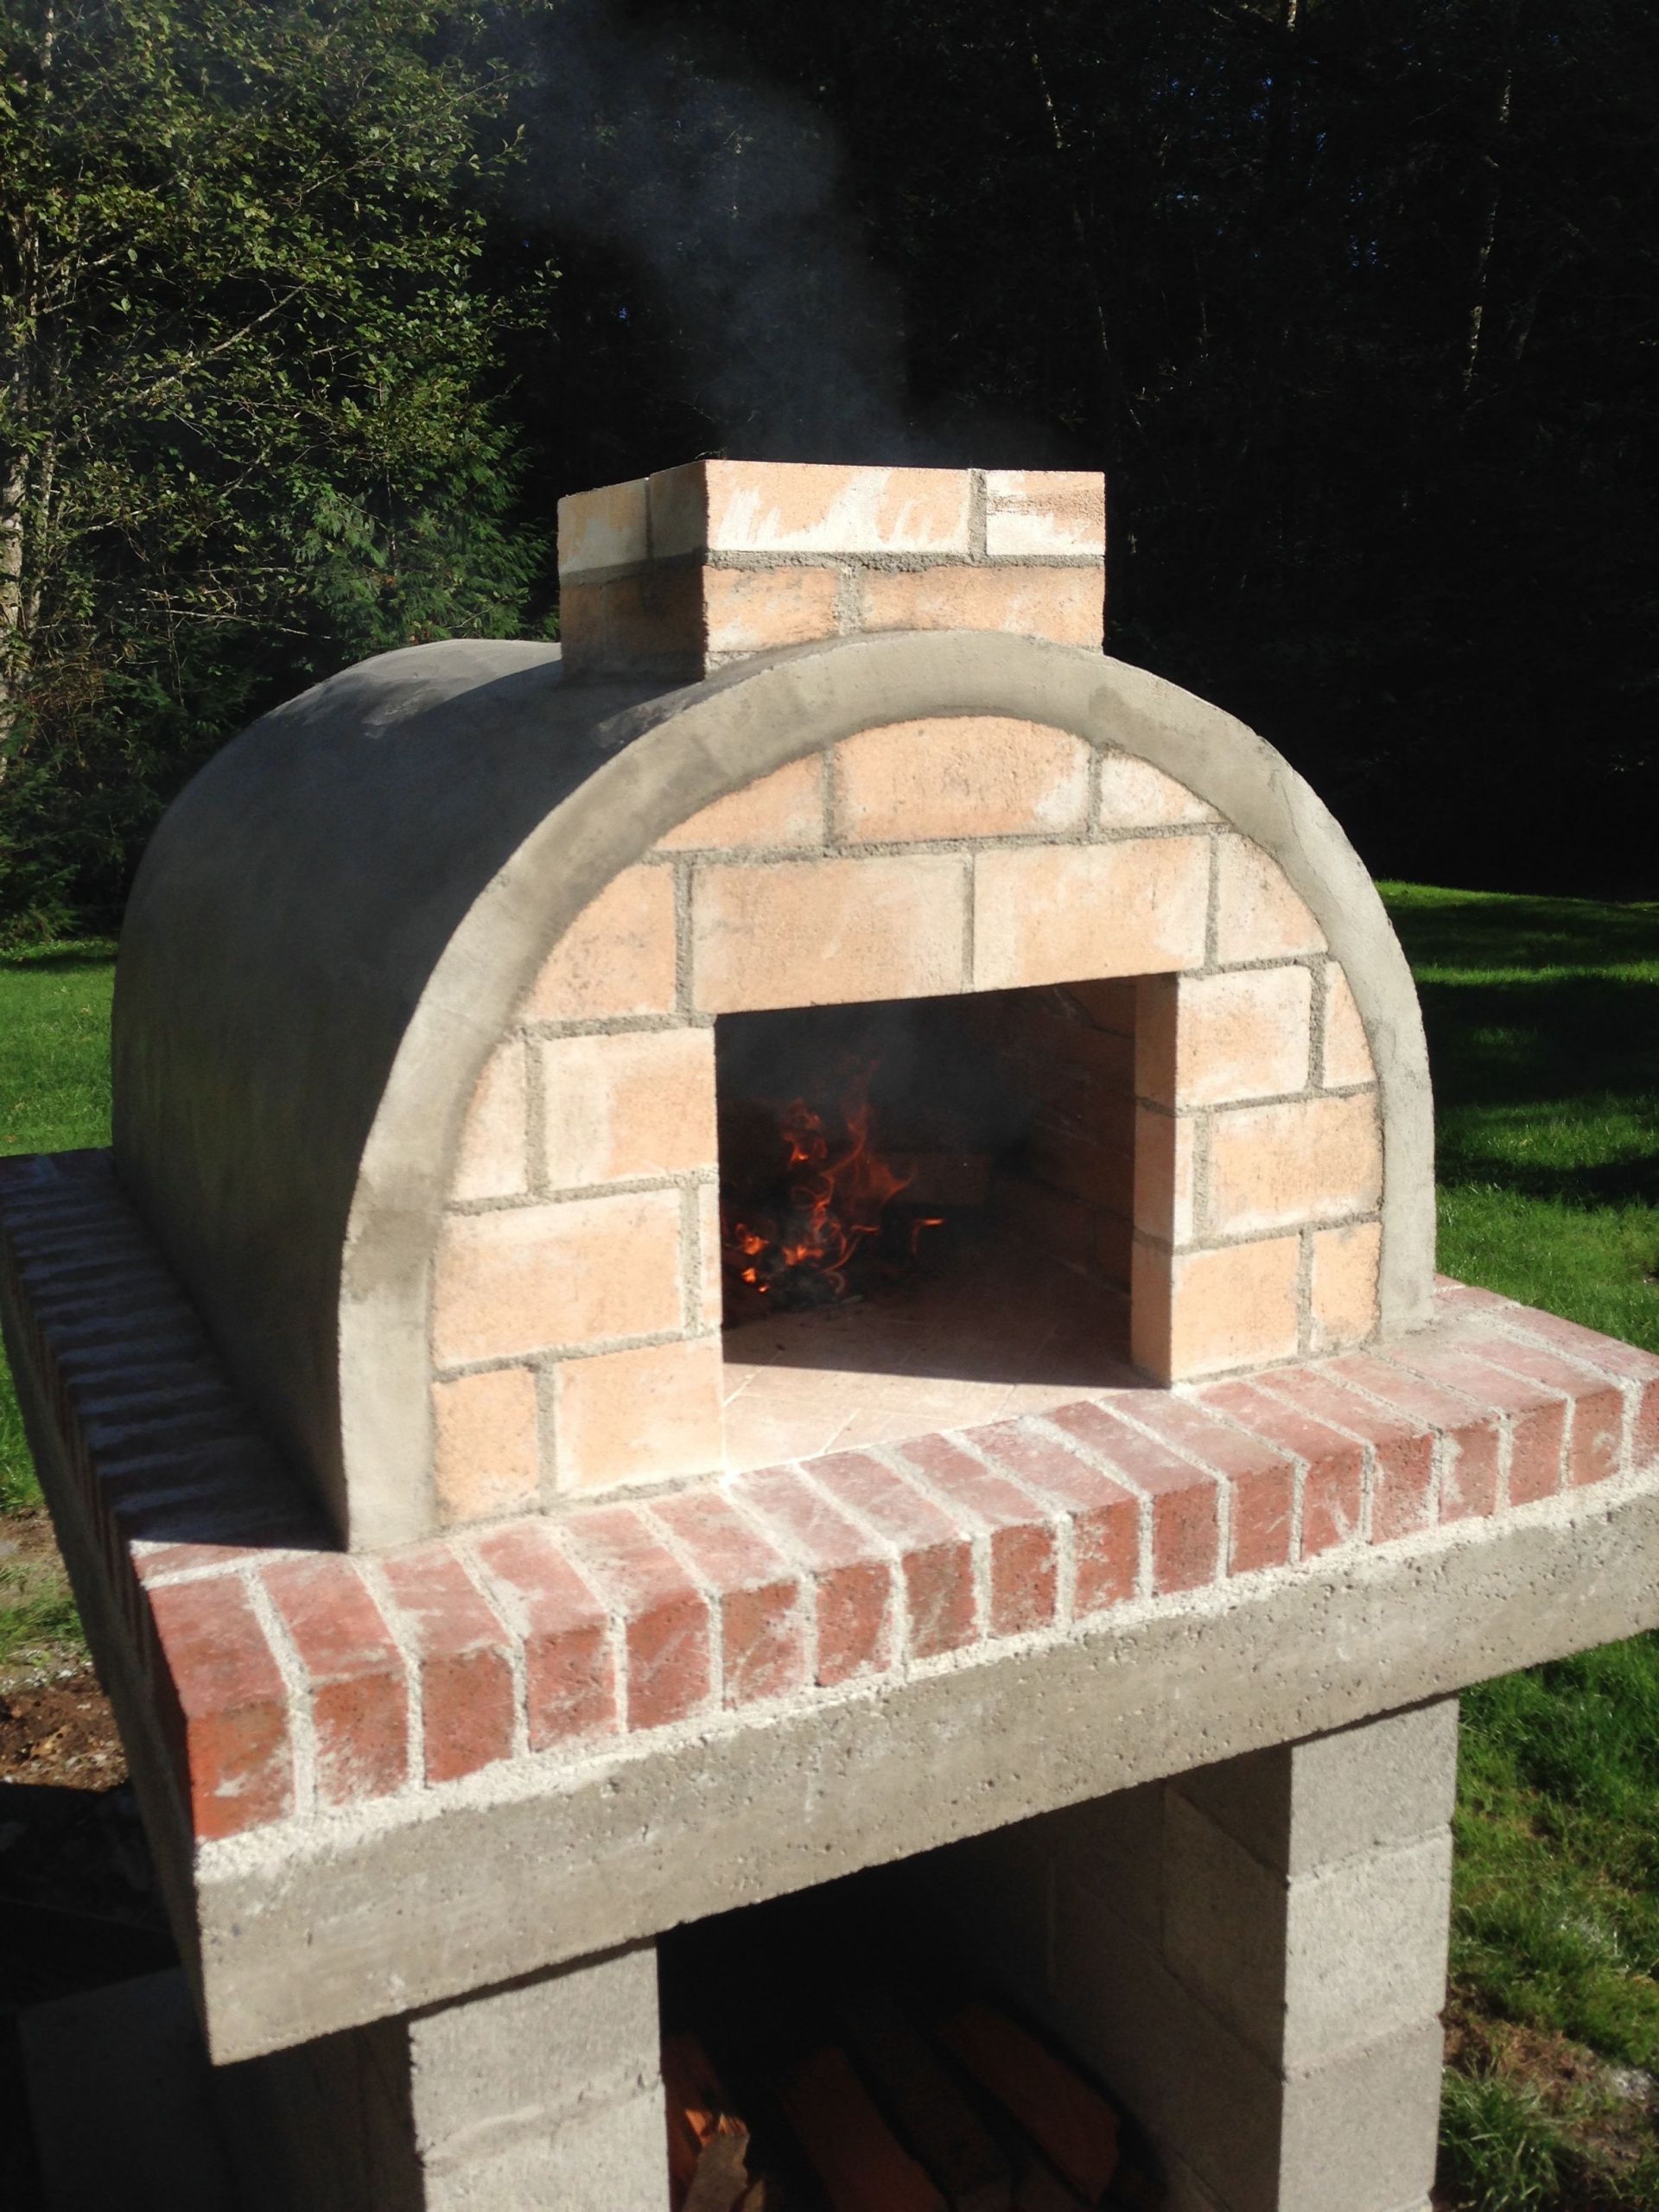 DIY Wood Pizza Oven
 Anderson Family Wood Fired Outdoor DIY Pizza Oven by